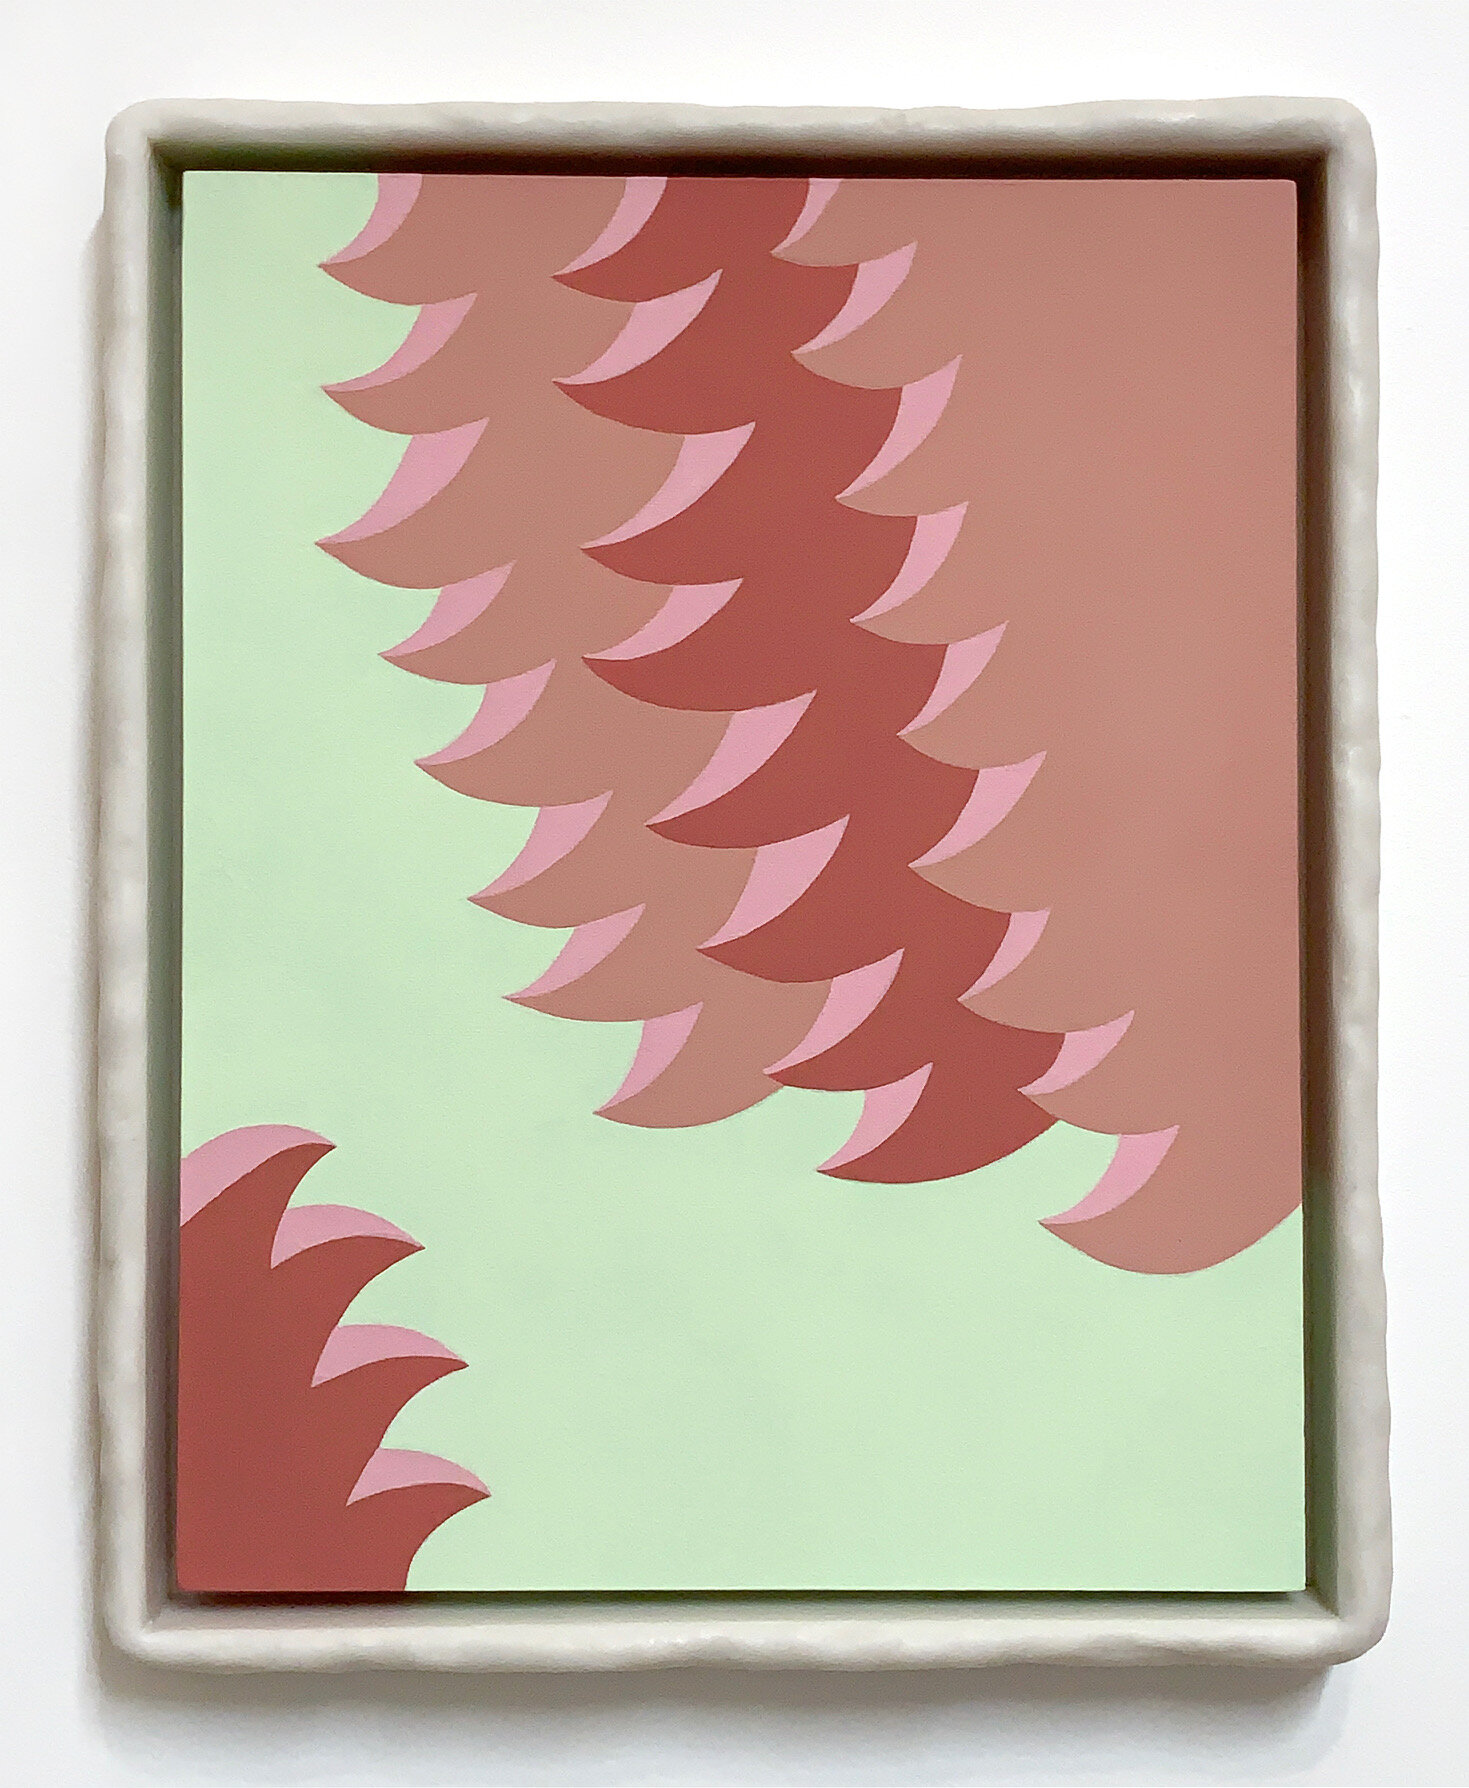   Jagged Blush , 2020  15 x 12 x 2 inches  Flashe on wood panel in marble composite frame 